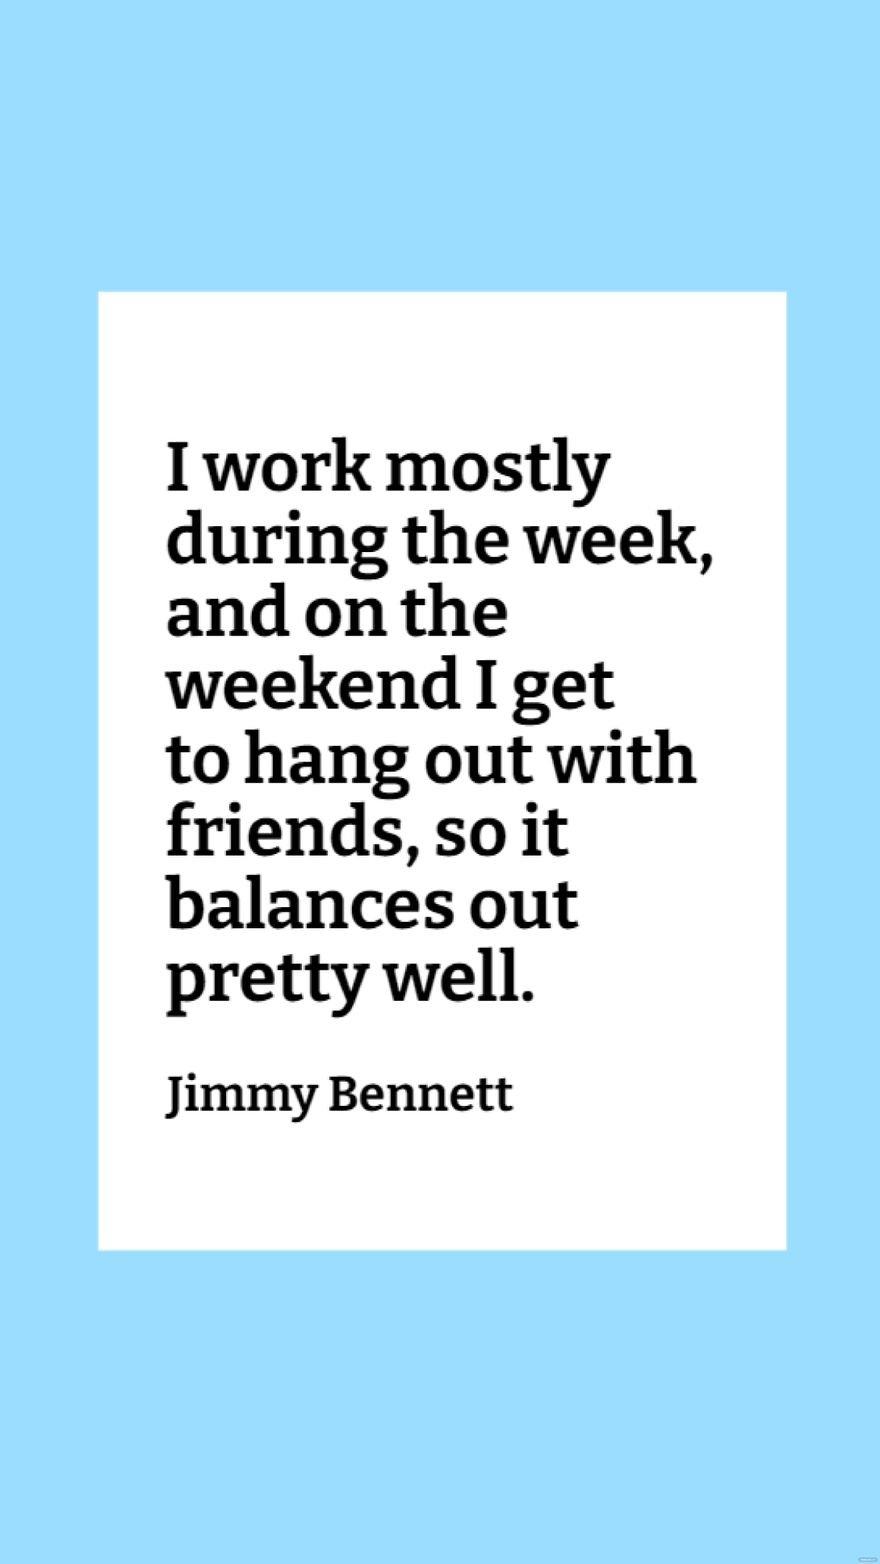 Jimmy Bennett - I work mostly during the week, and on the weekend I get to hang out with friends, so it balances out pretty well.